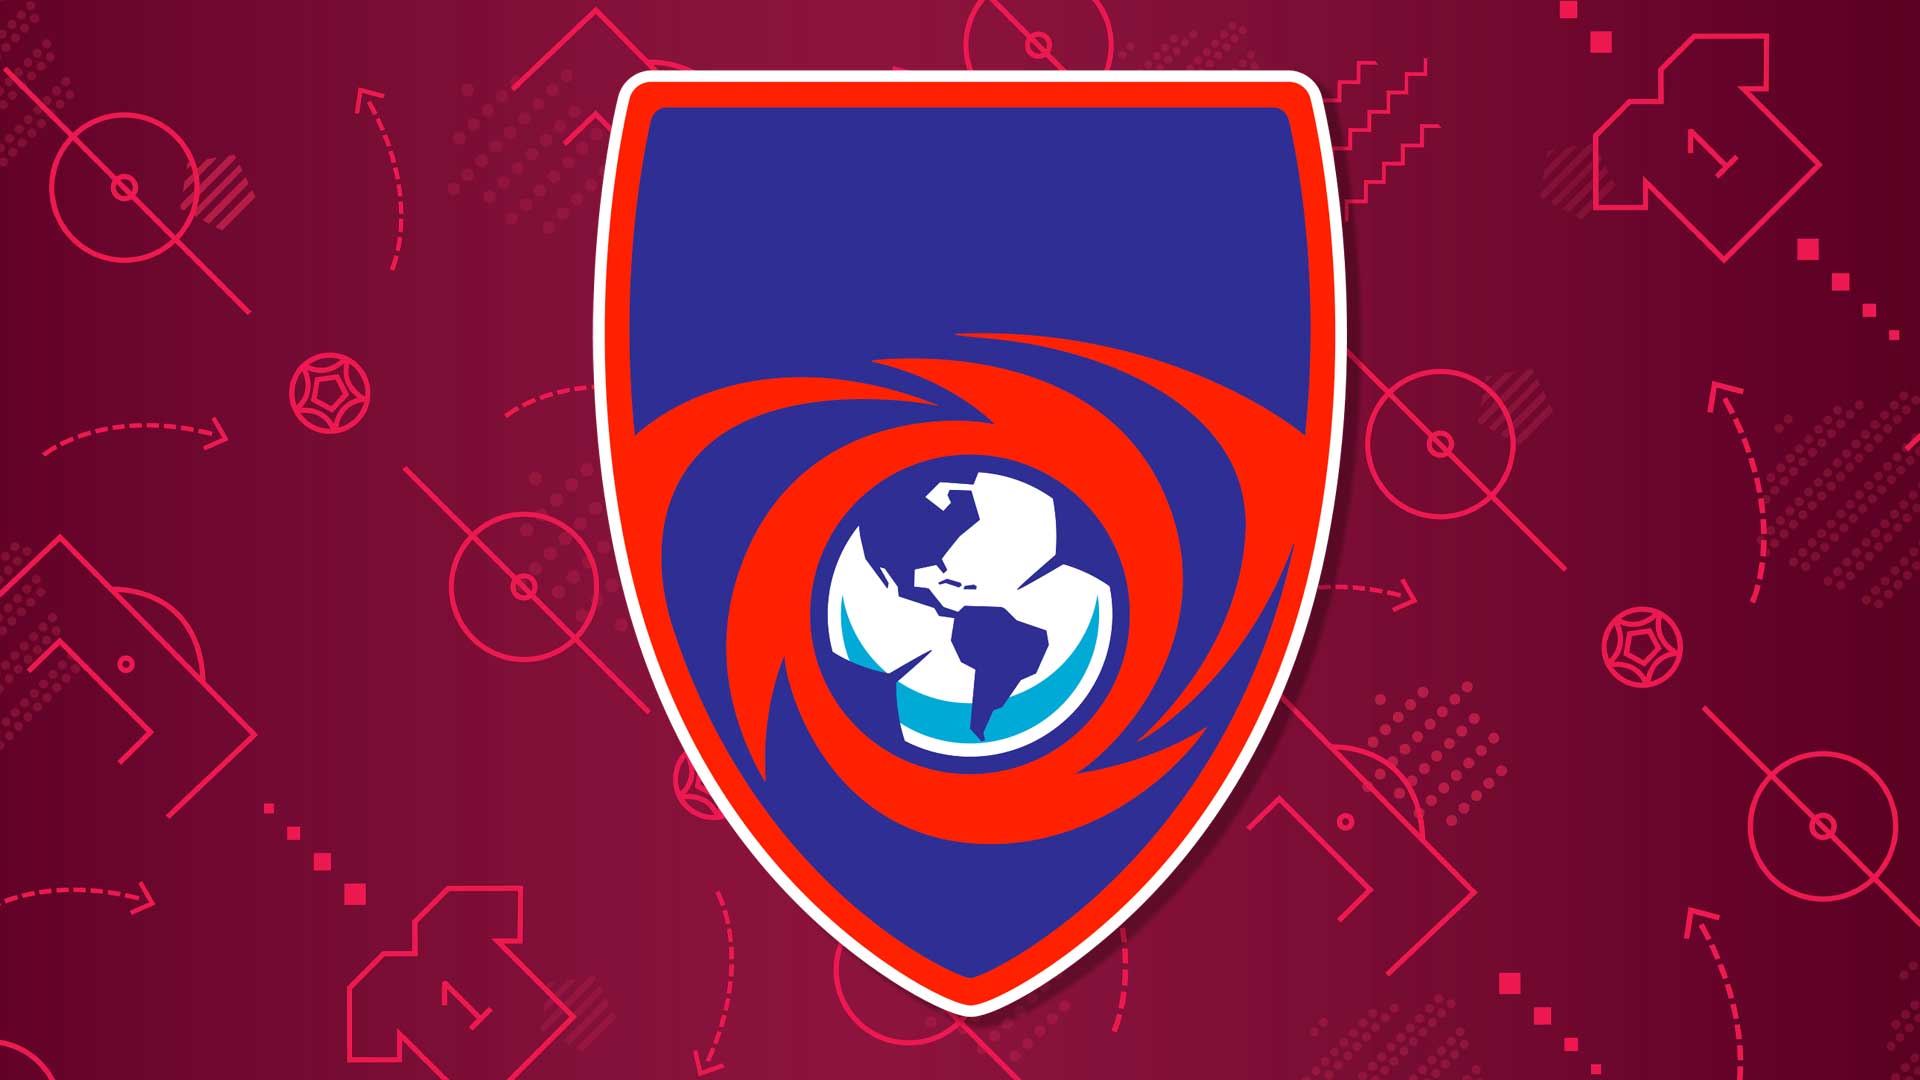 A disguised Miami football badge